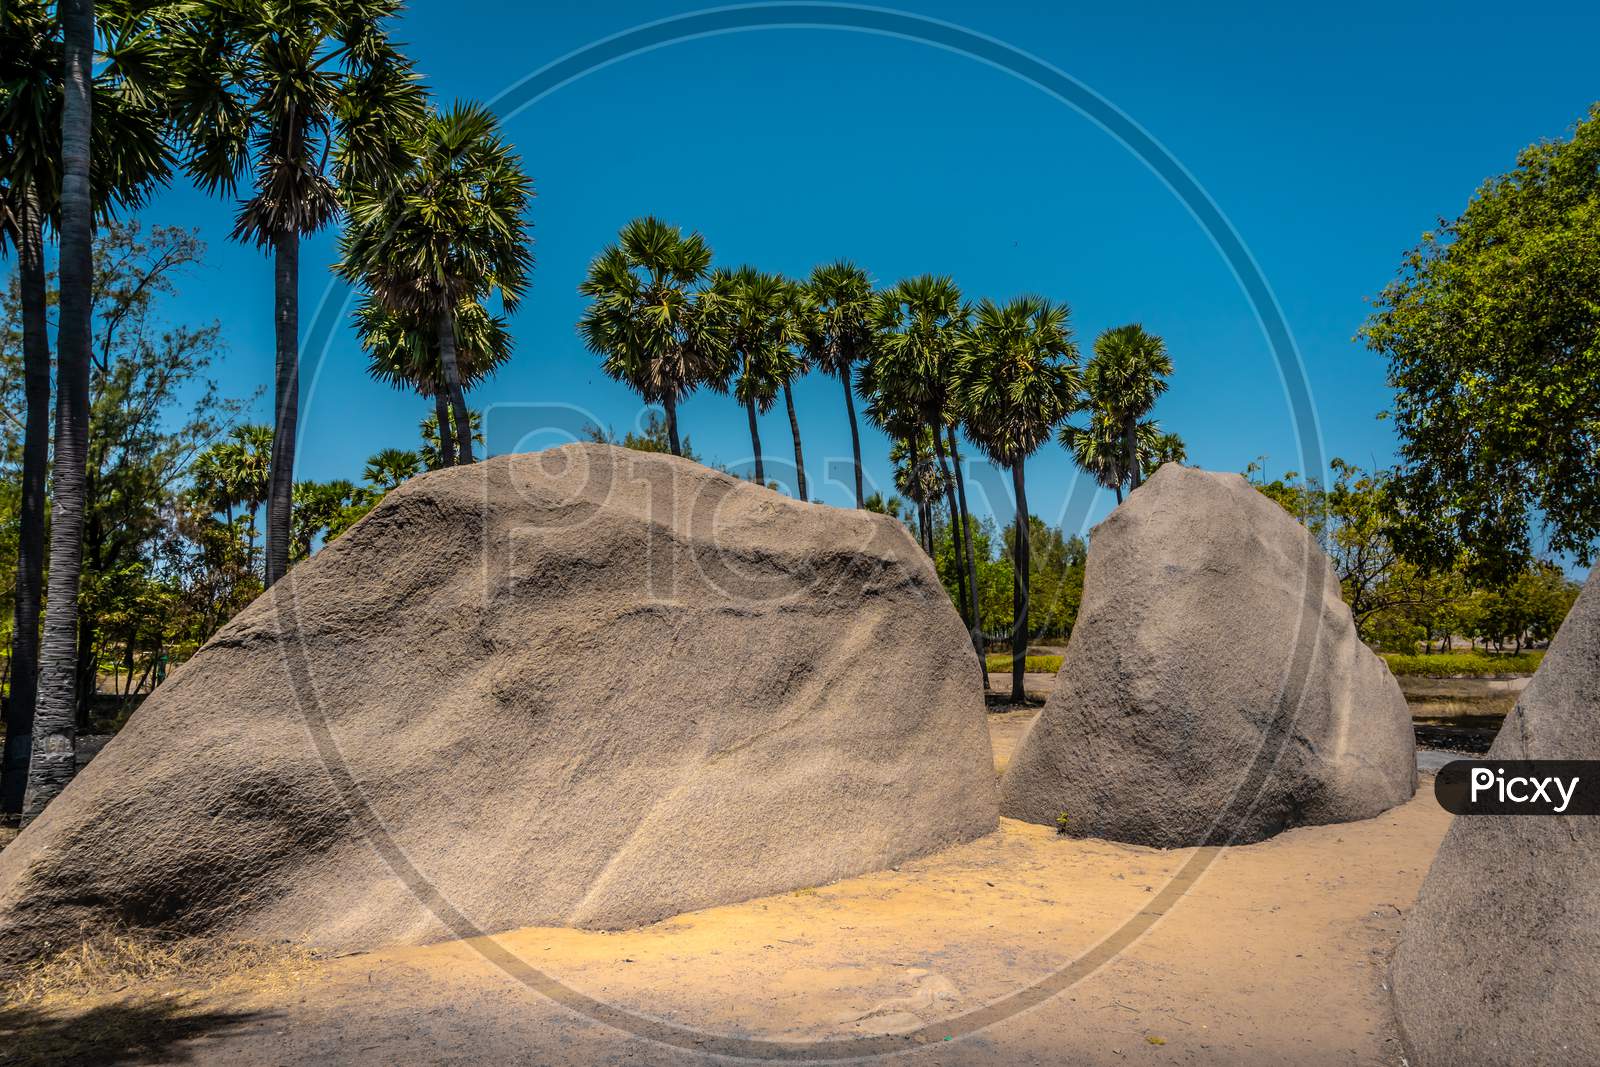 The Largest and very old rocks found near, The famous tiger cave temple is a rock-cut Hindu temple located in the hamlet near Mahabalipuram in Tamil Nadu, South India